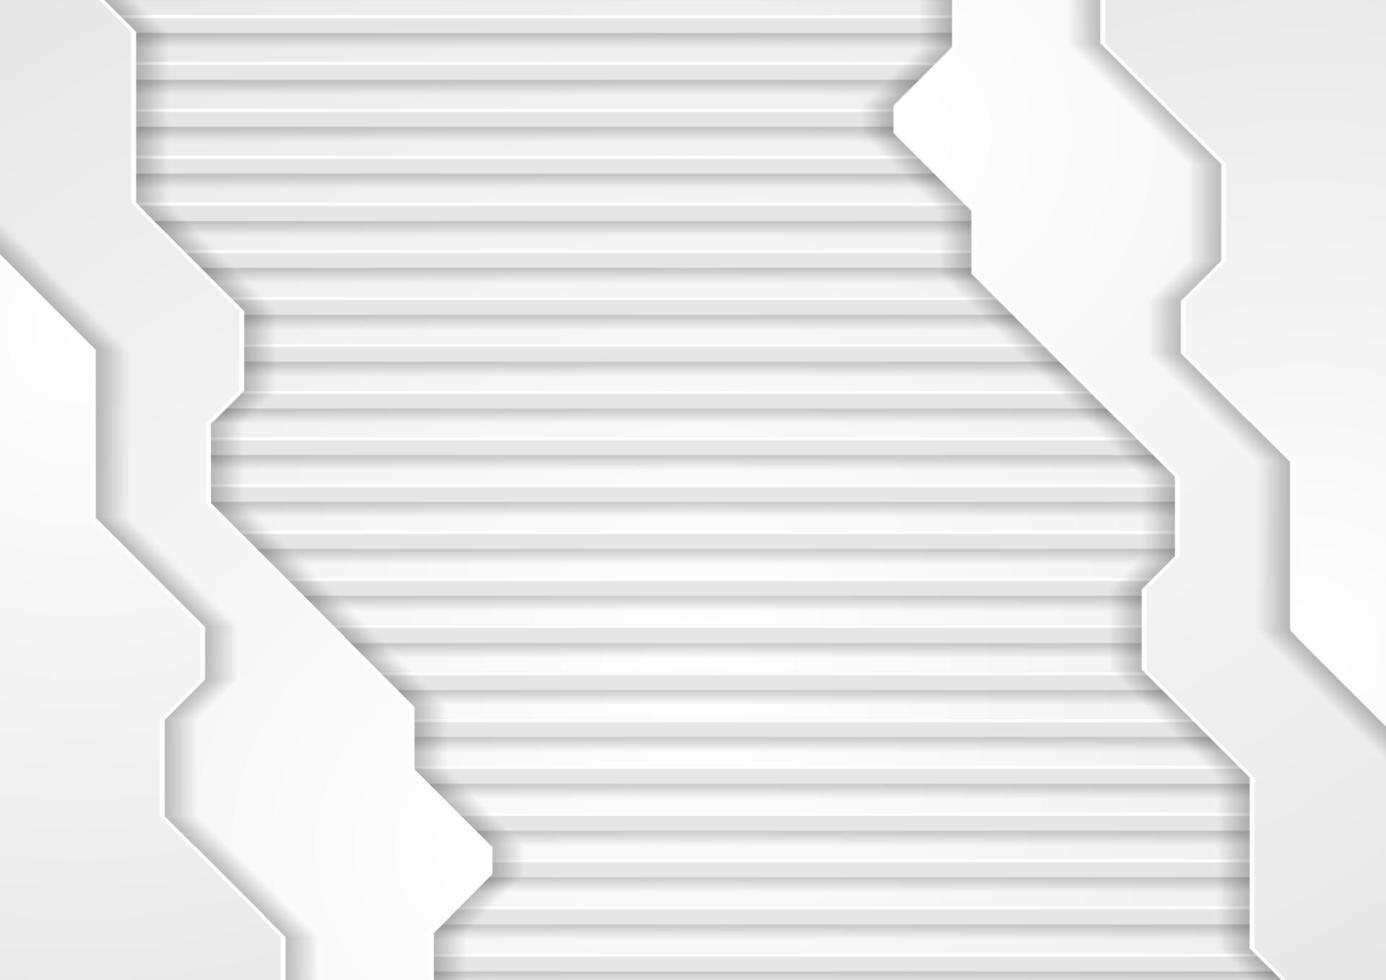 Grey hi-tech abstract striped background vector